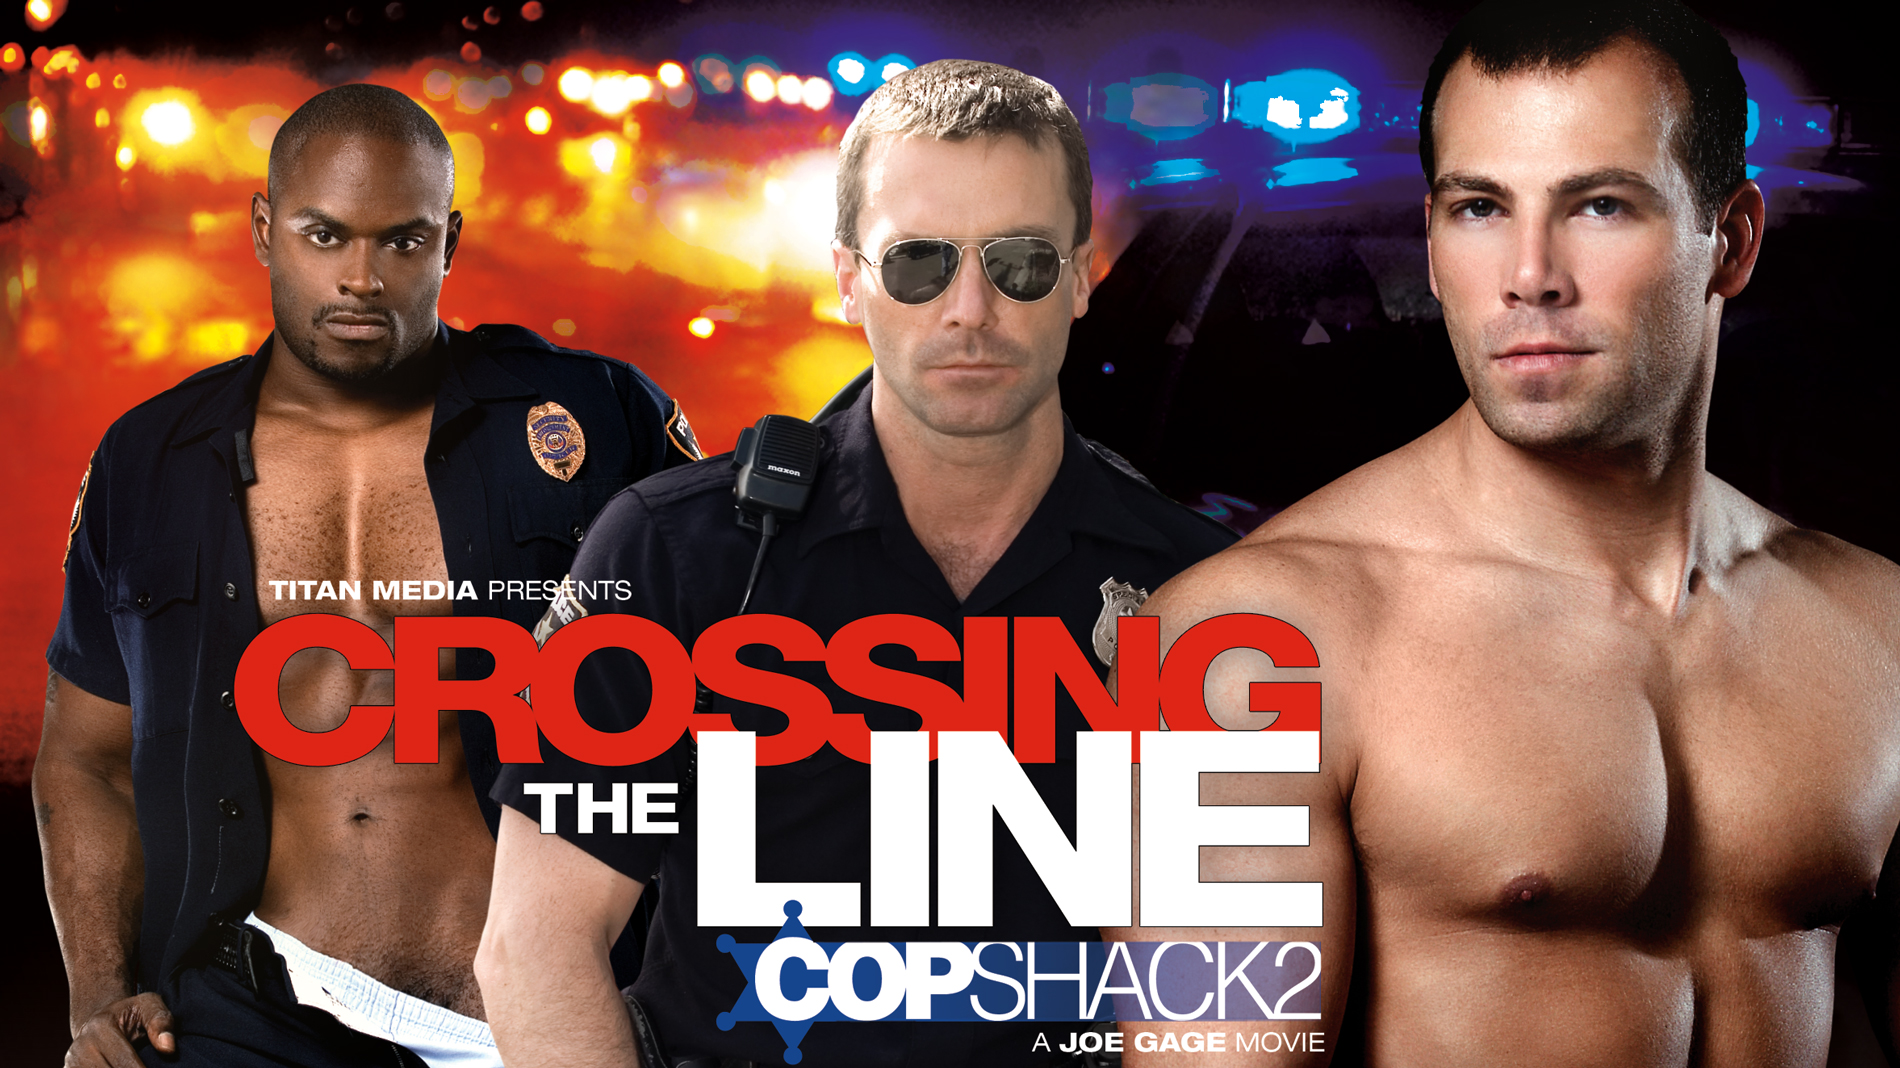 Cop Shack 2: Crossing The Line